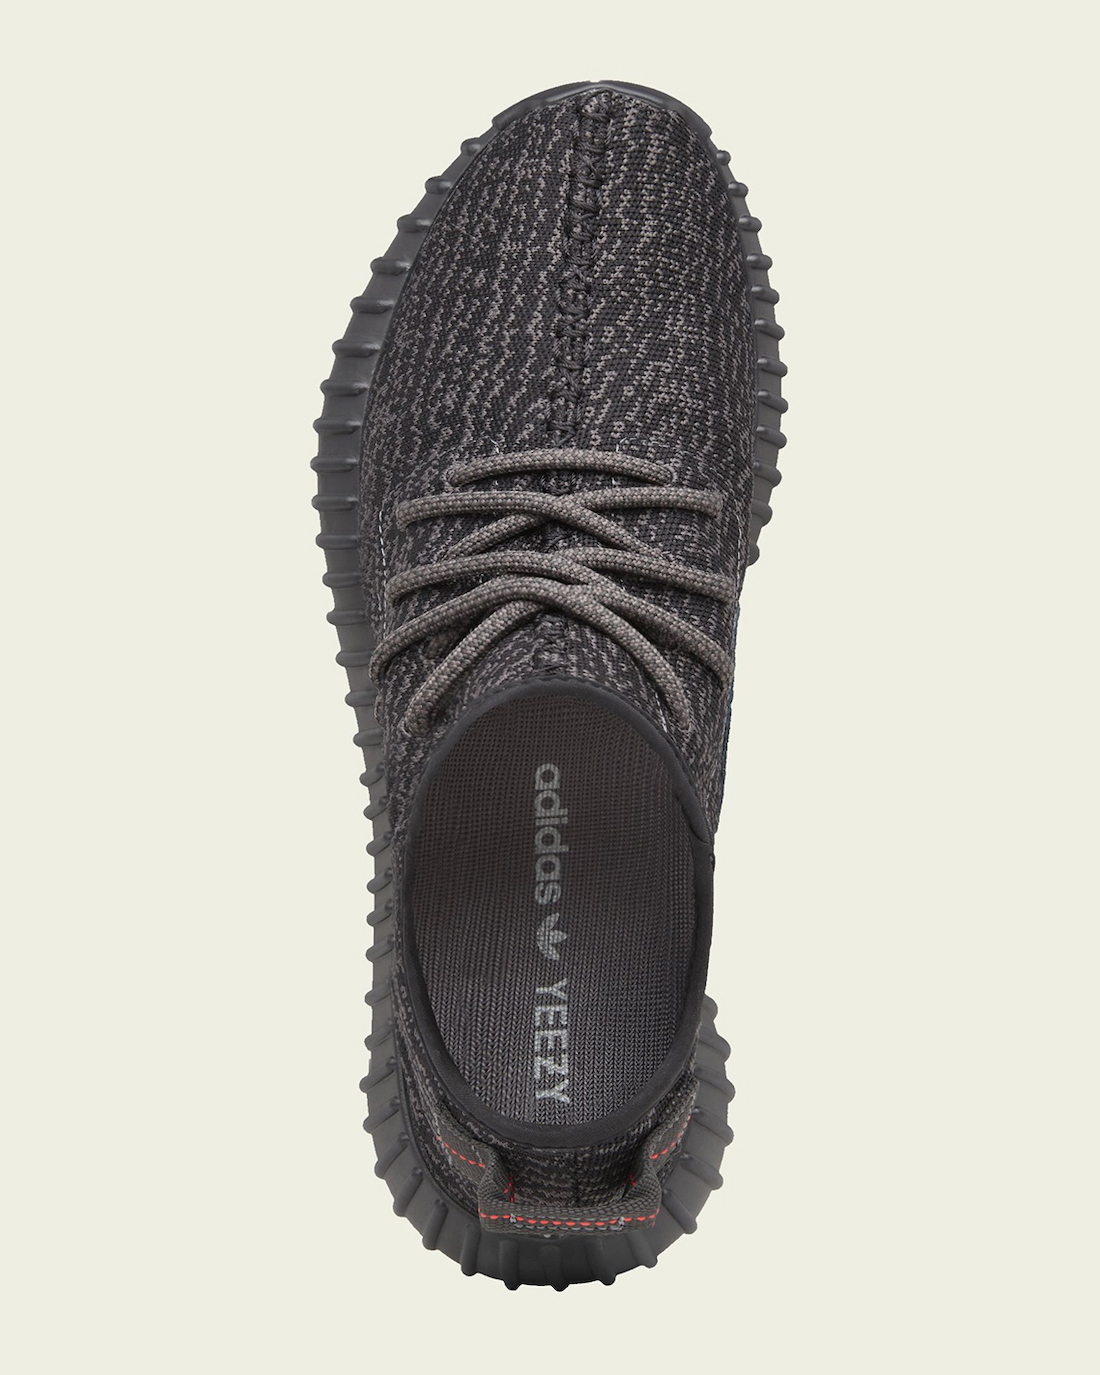 Yeezy-Boost-350-Pirate-Black-2023-Release-Date-2